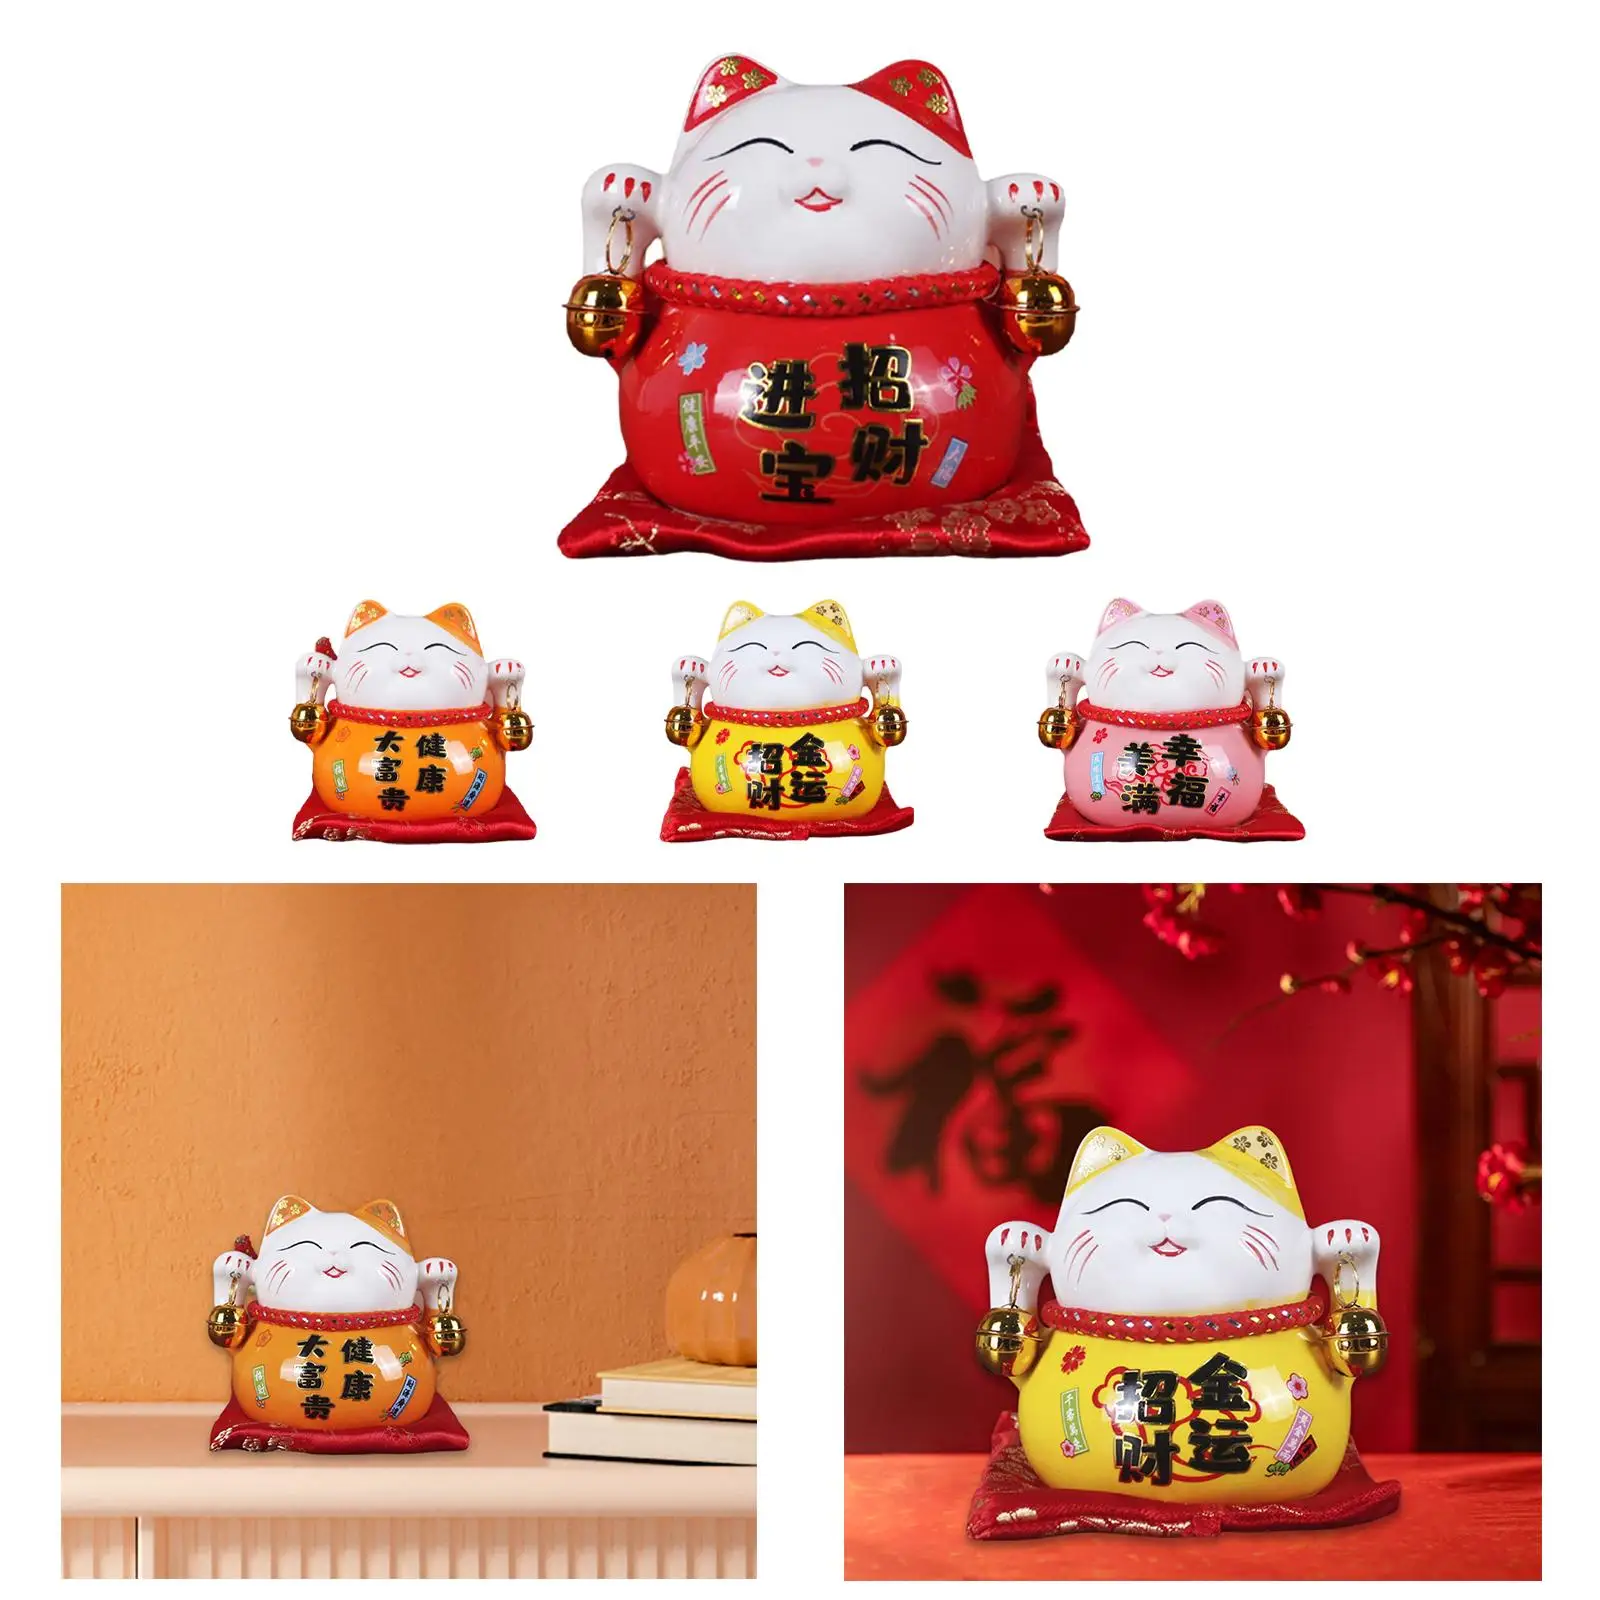 Cute Lucky Cat Money Bank Animal Statue with Two Bells Money Saving Pot Jar Craft Change Container for Business Gifts Tabletop